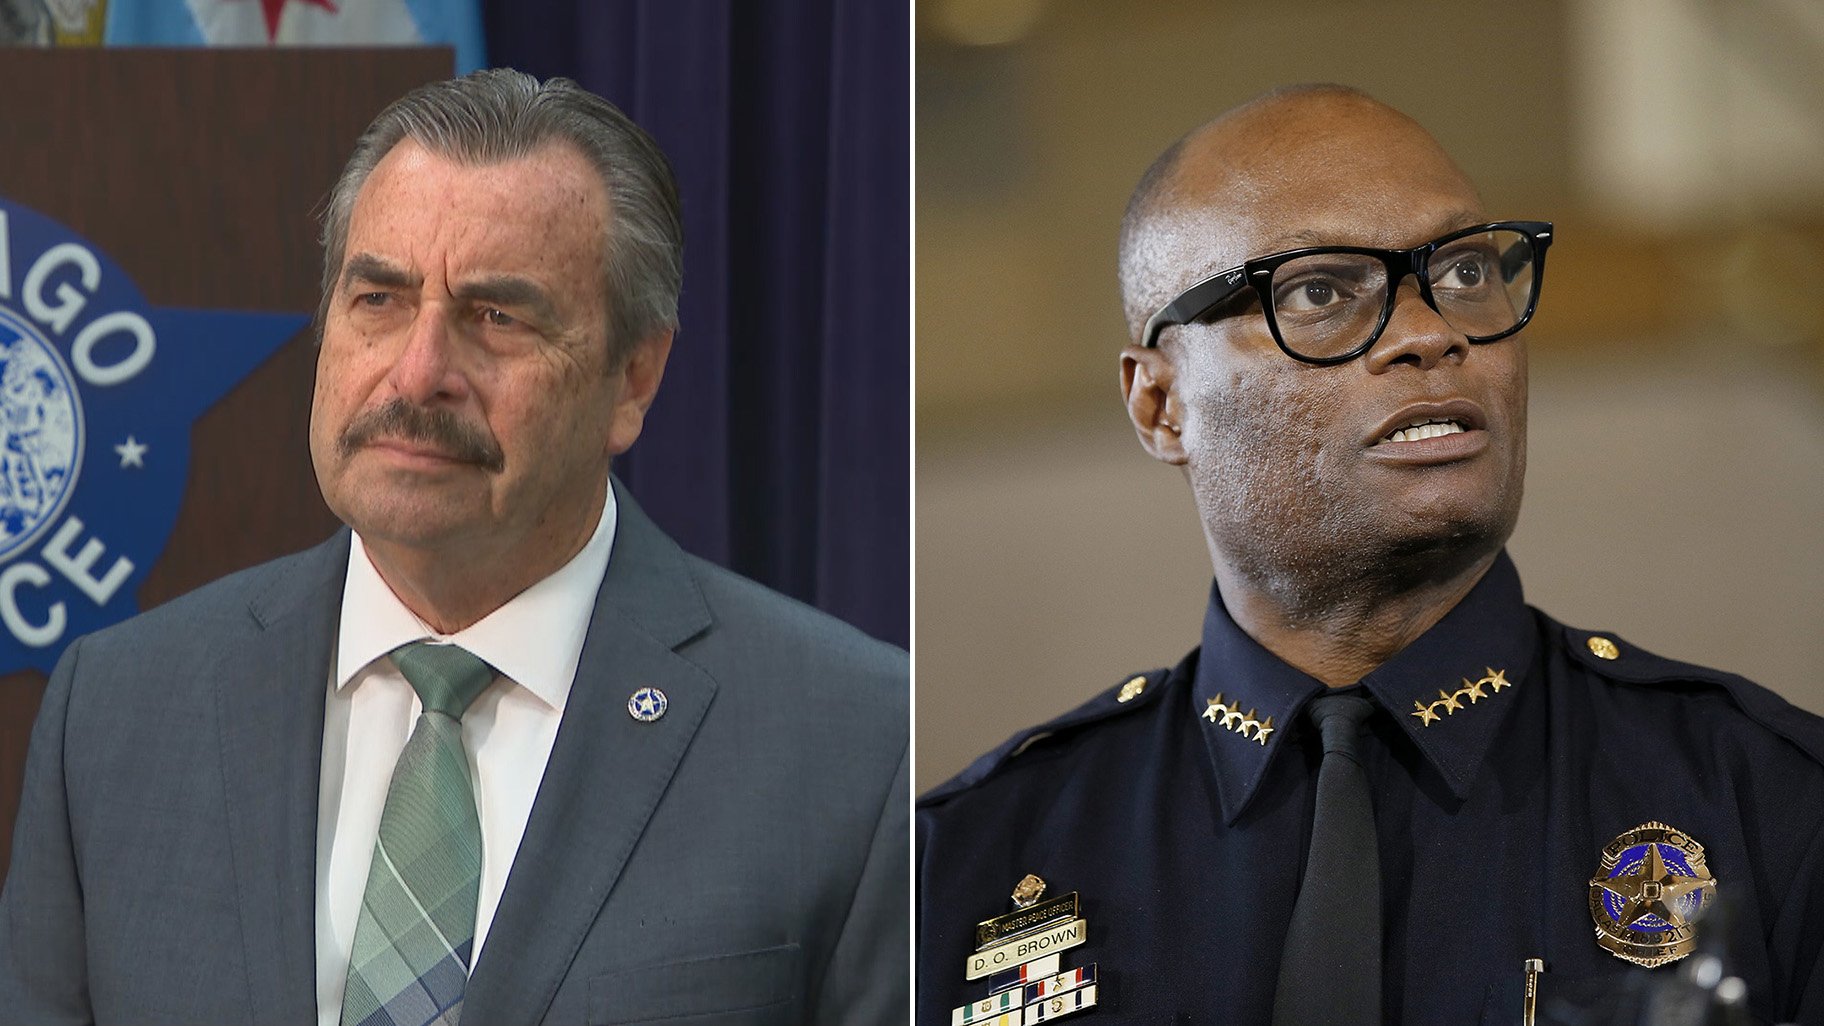 Left: Interim Chicago Police Superintendent Charlie Beck speaks with “Chicago Tonight” on April 8, 2020. Right: Dallas Police Chief David Brown briefs the media on June 15, 2015 about a shooting at Dallas Police headquarters in Dallas. (AP Photo / Tony Gutierrez, File)